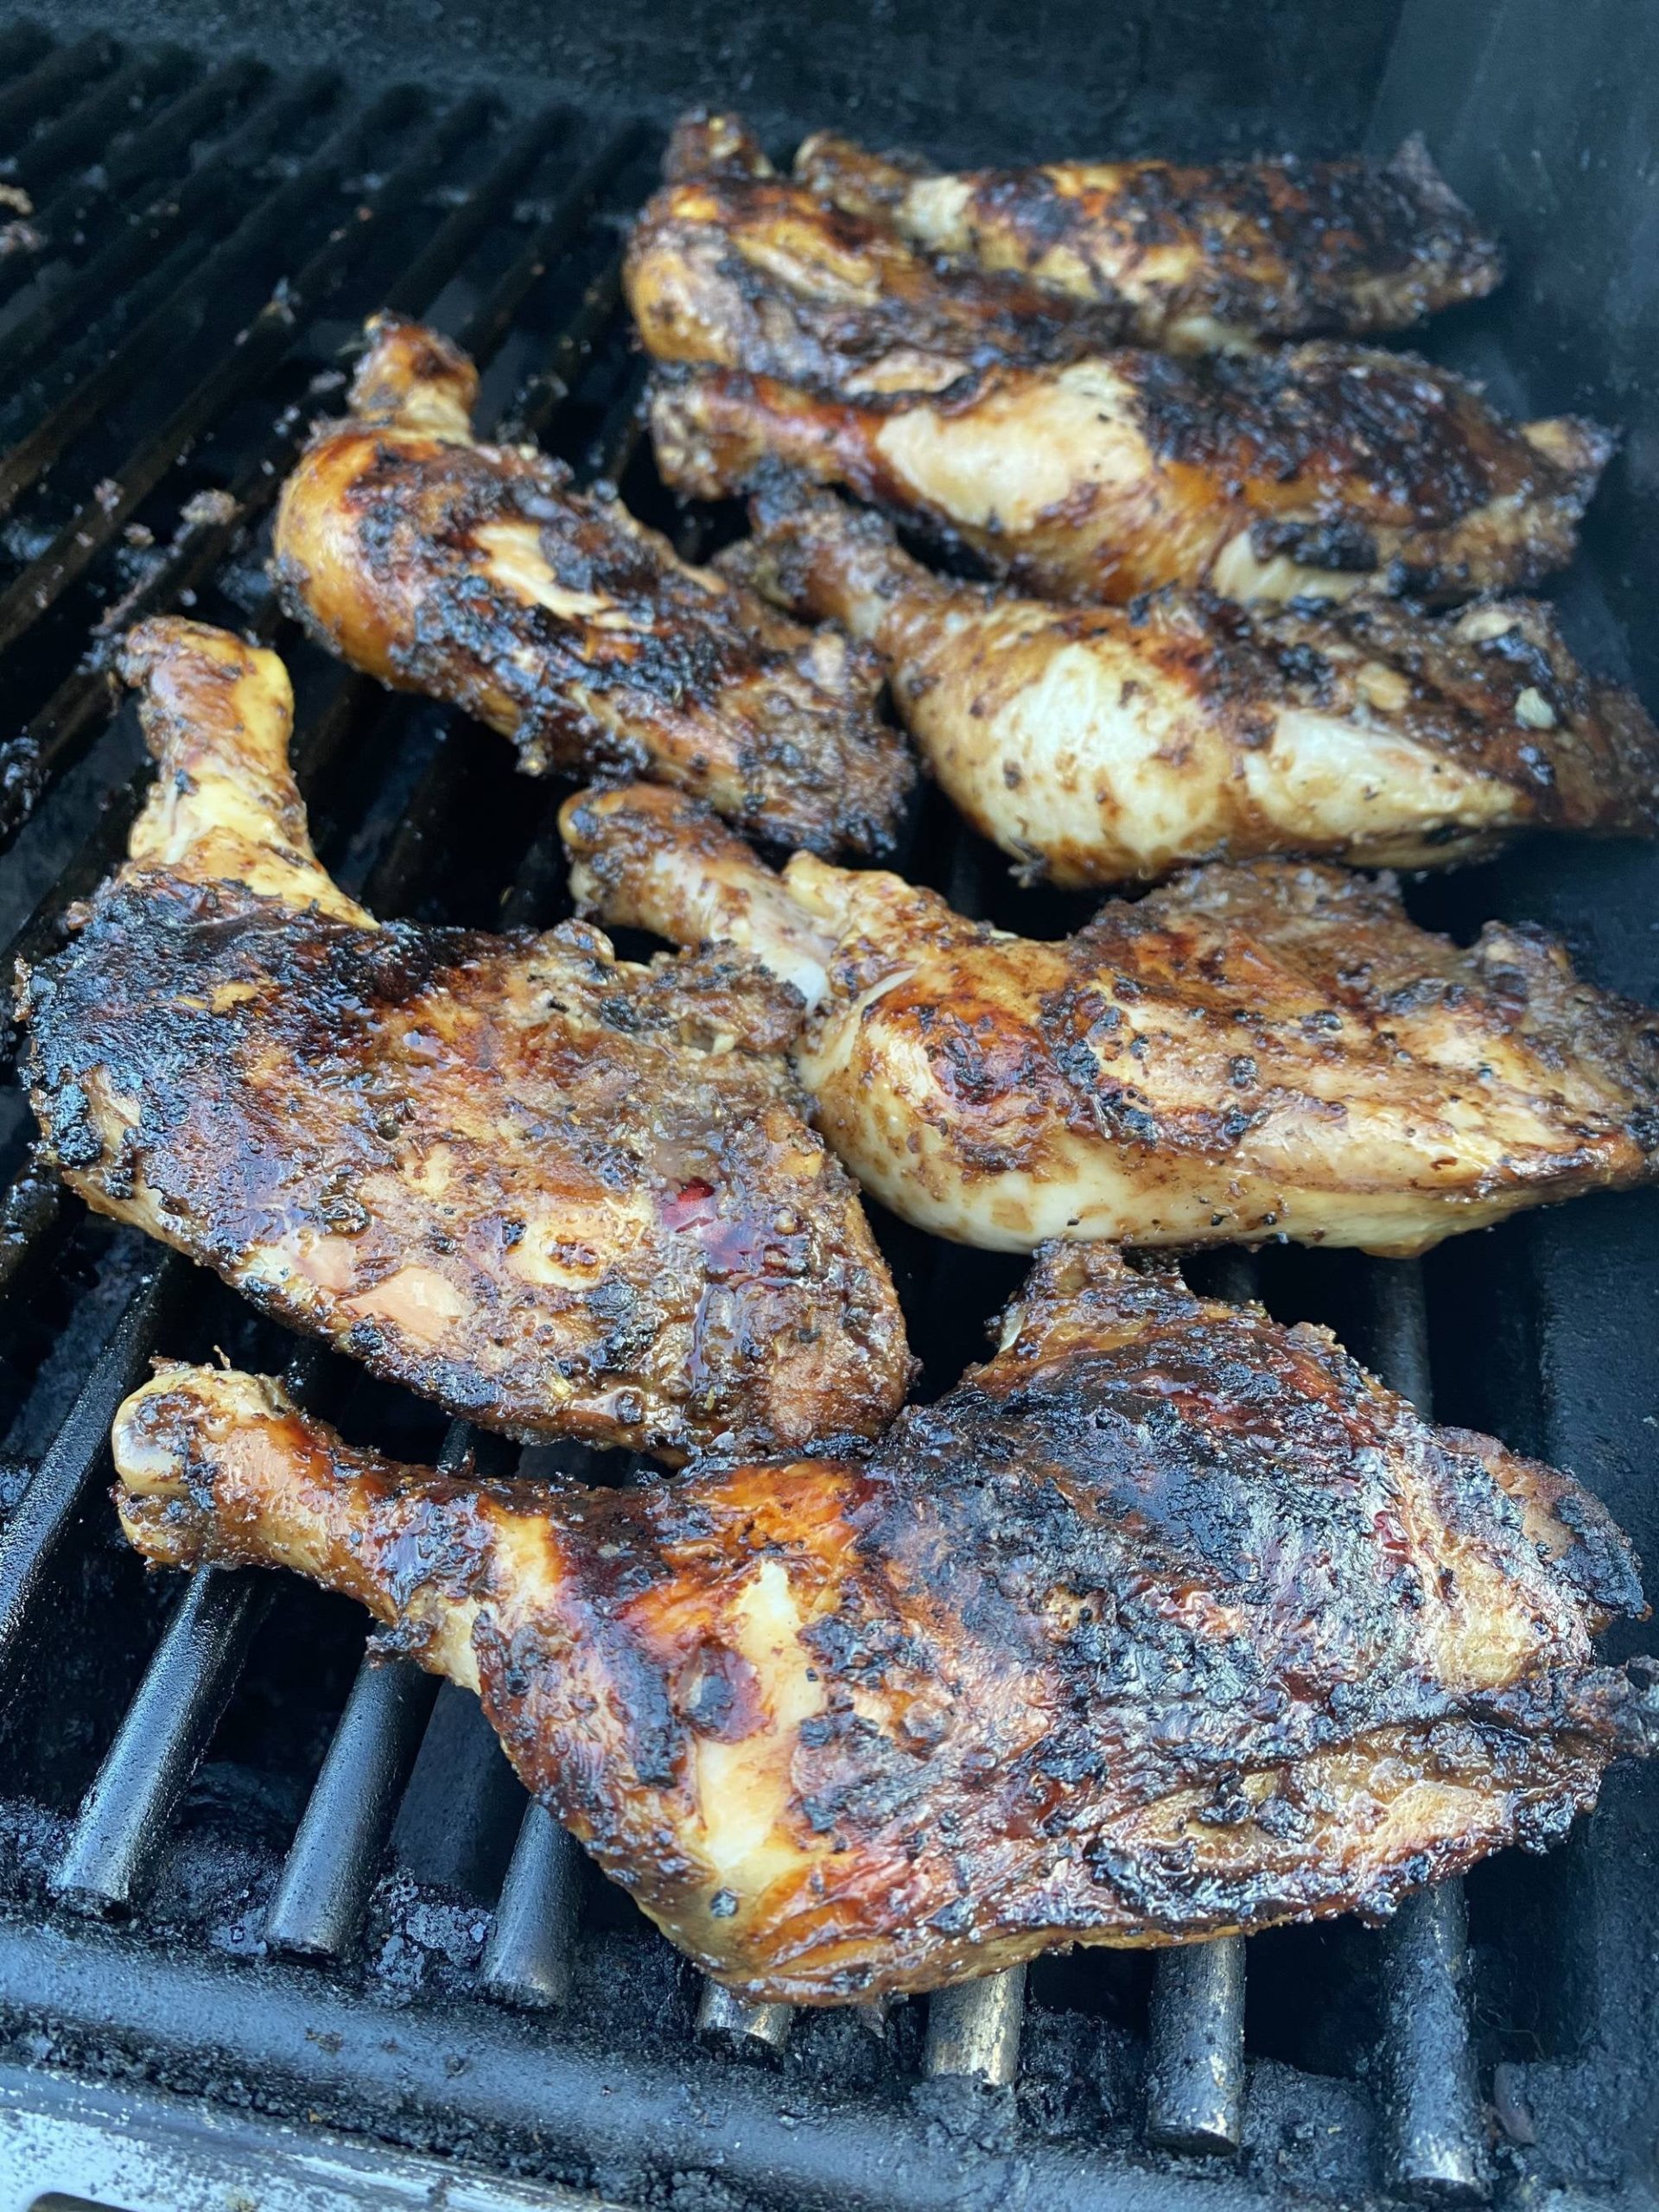 Jerk Chicken Dining And Cooking